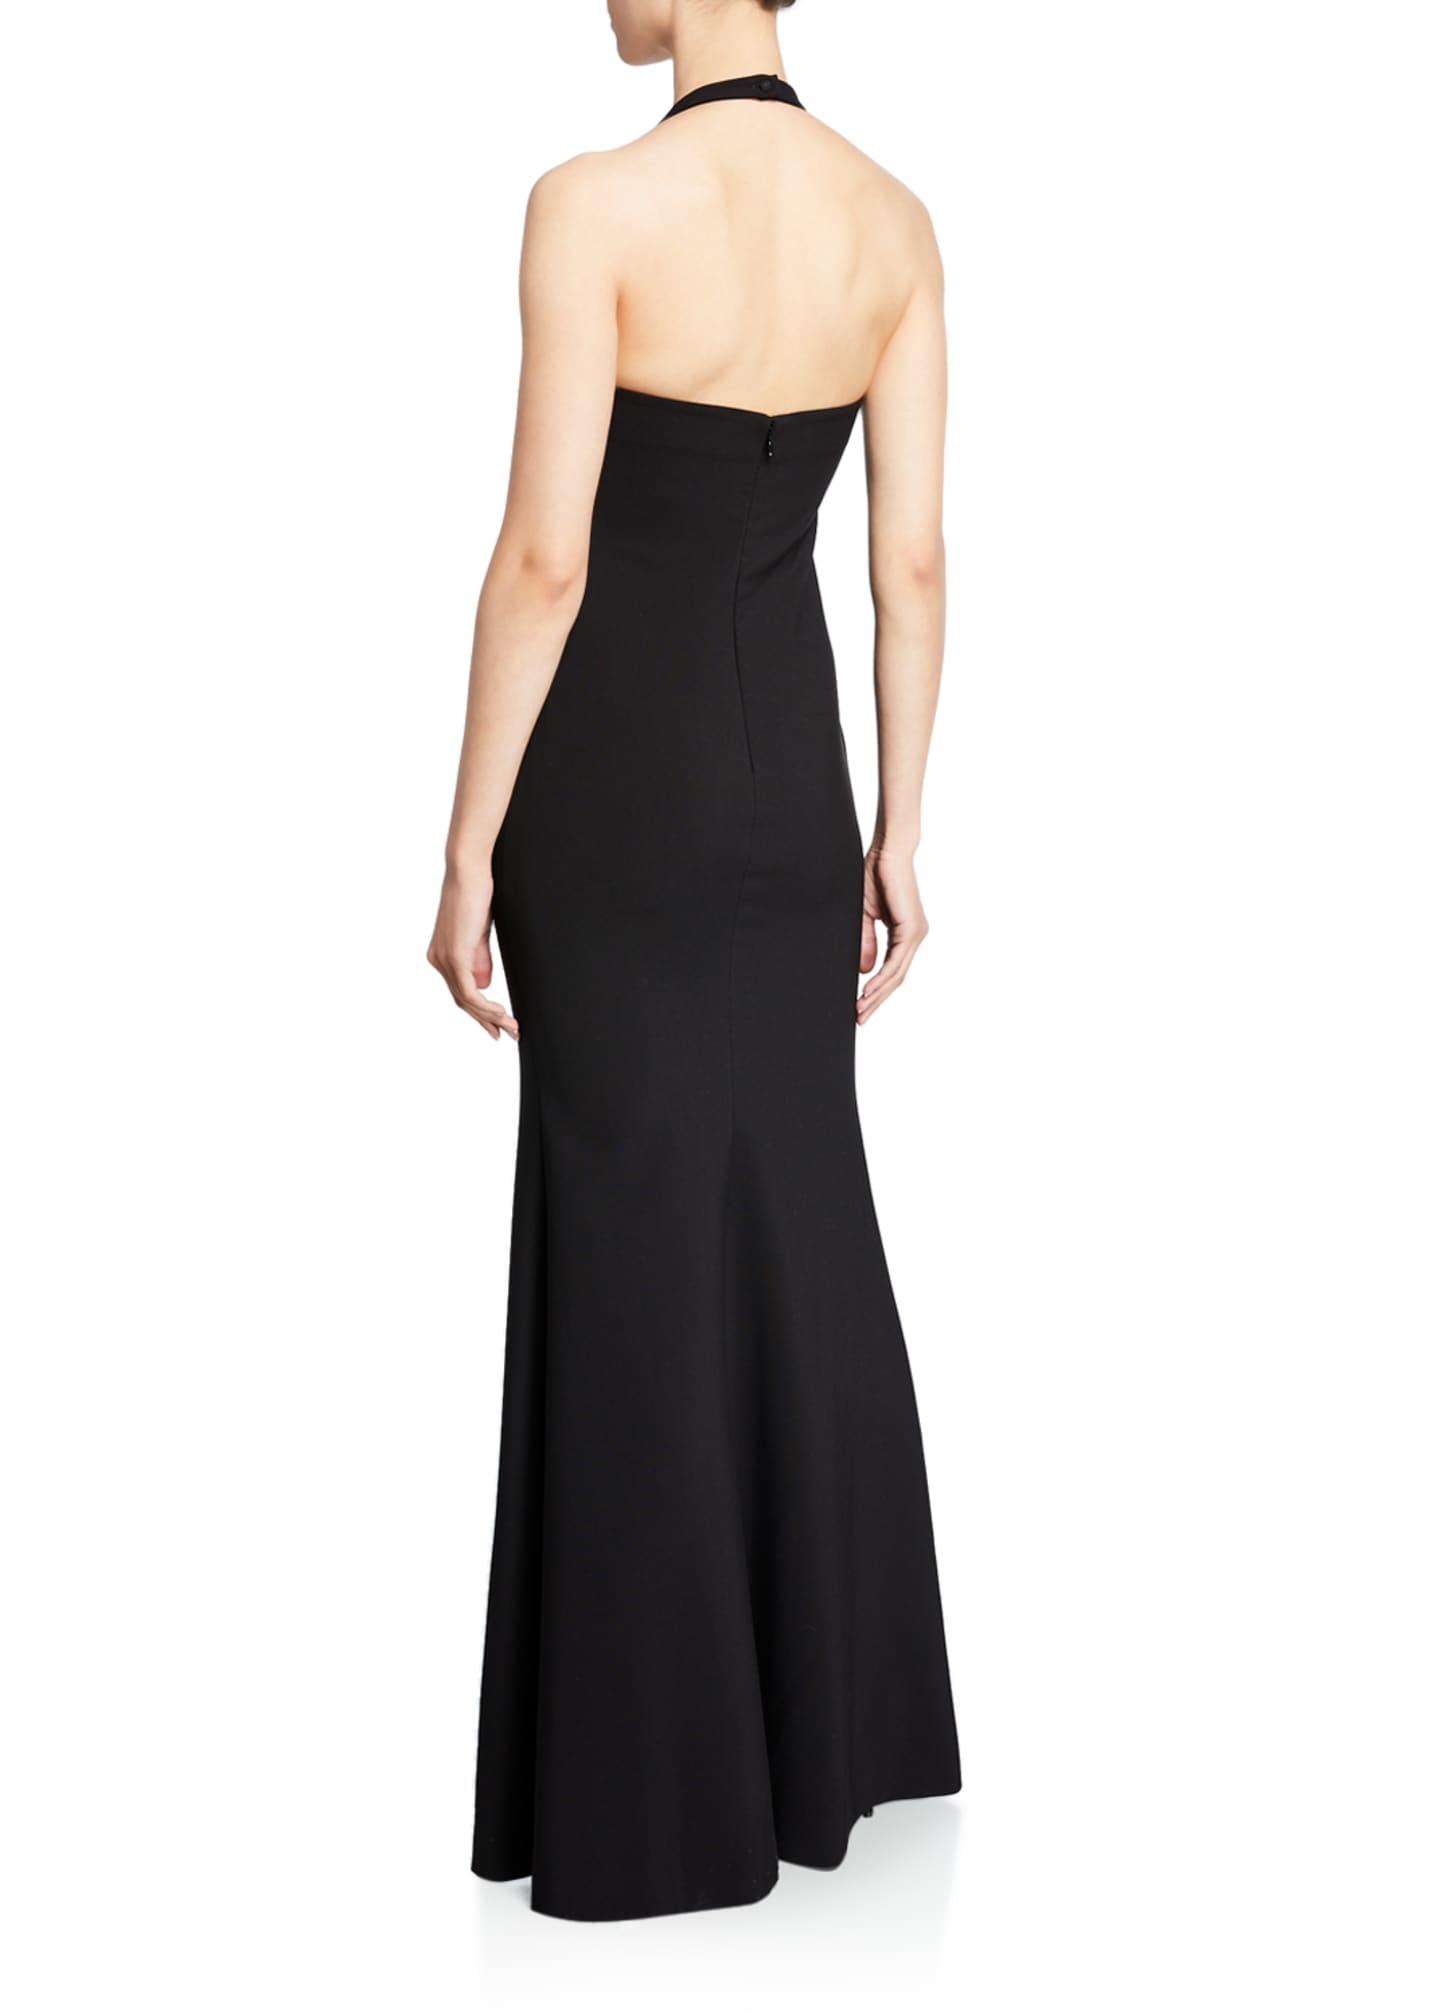 Likely Claire Halter Gown with Thigh-Slit - Bergdorf Goodman